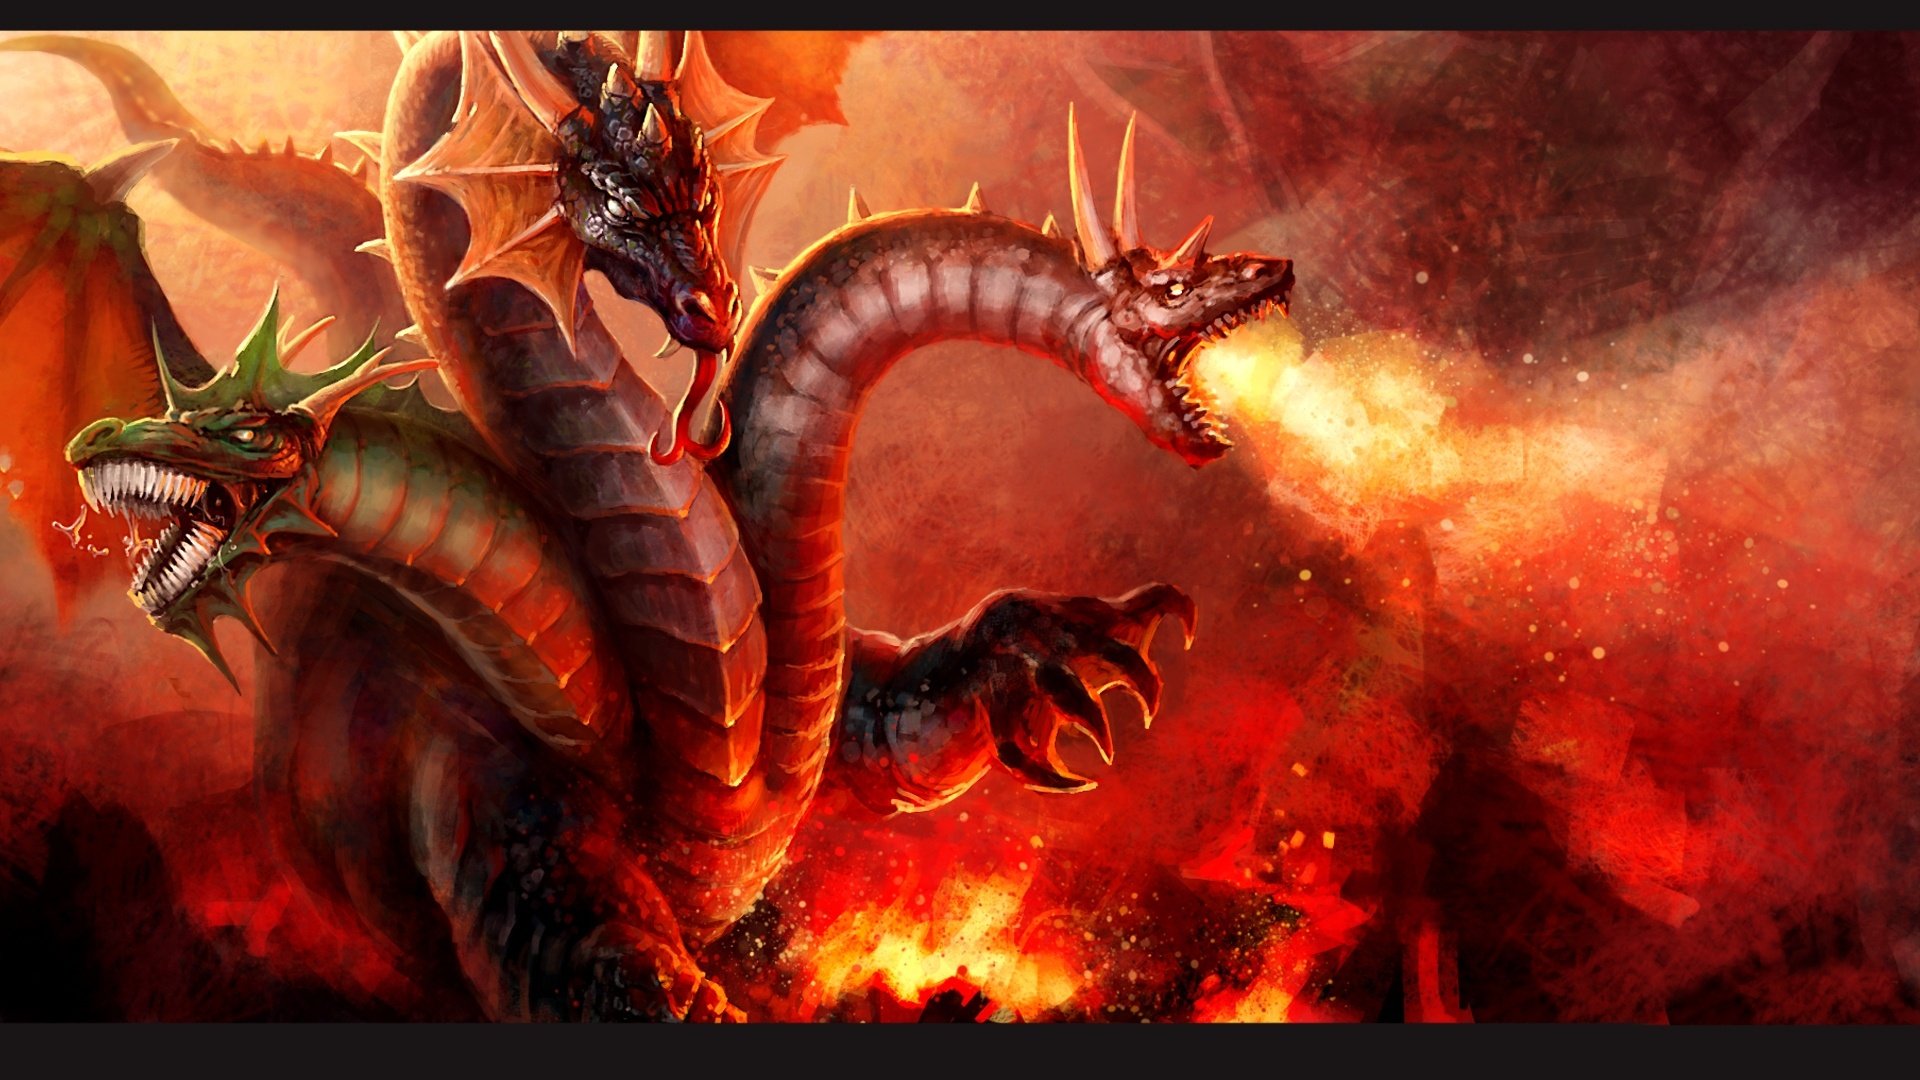 heroes, Of, Newerth, Dragon, Fire, Battle, Draconic, Games, Fantasy Wallpaper